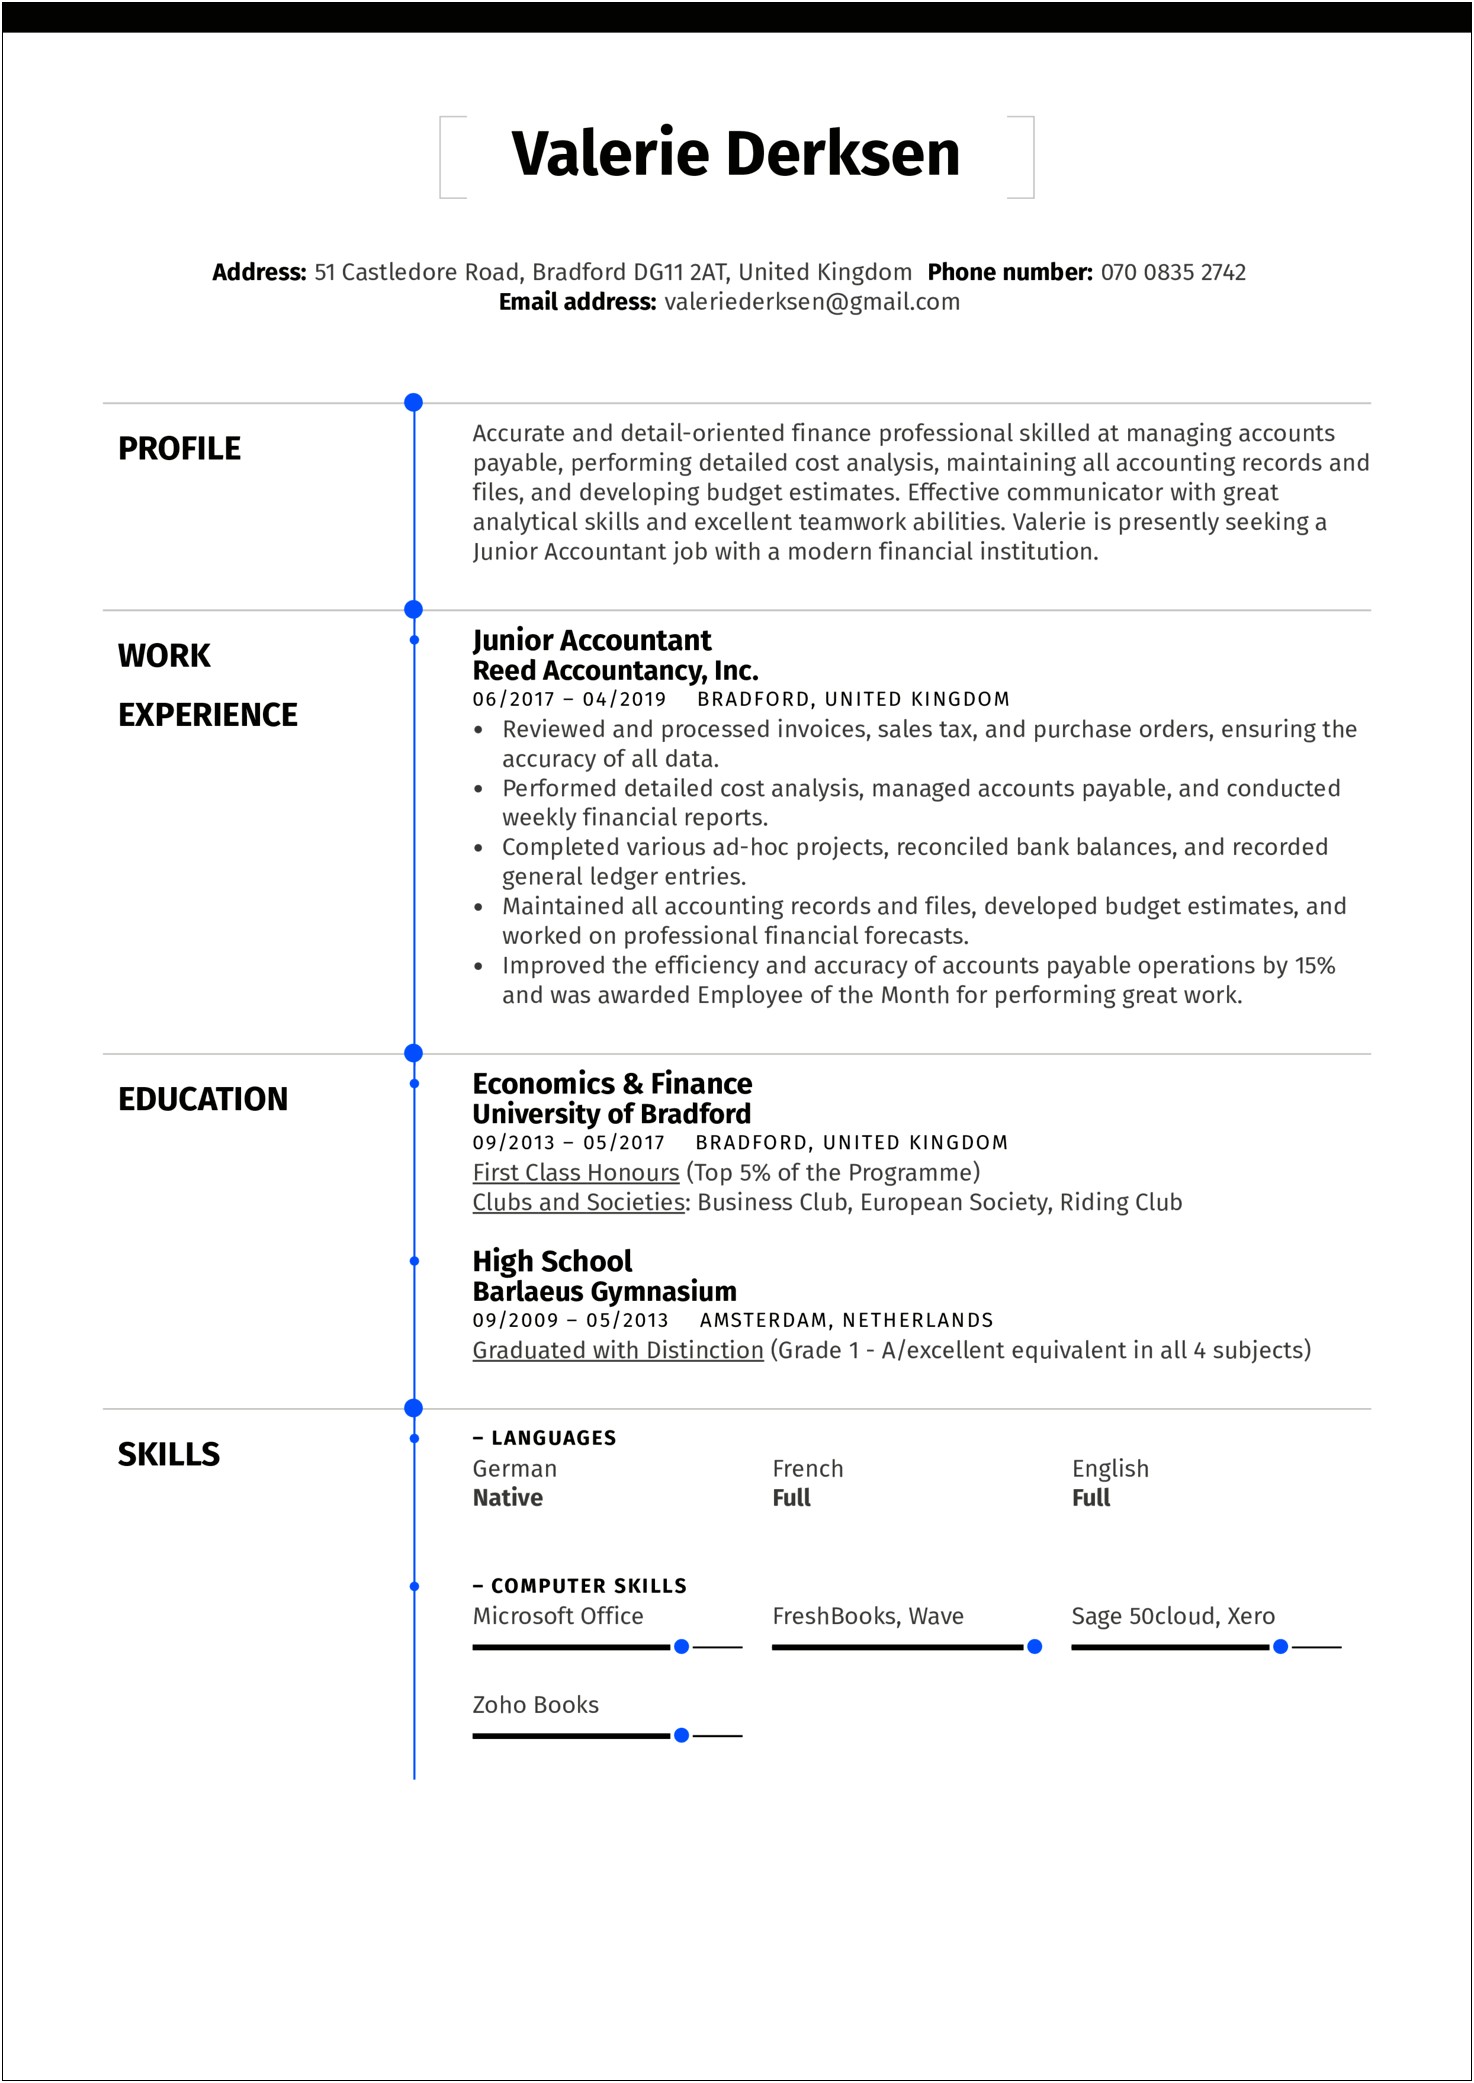 Resume Objective Sample For Accountant